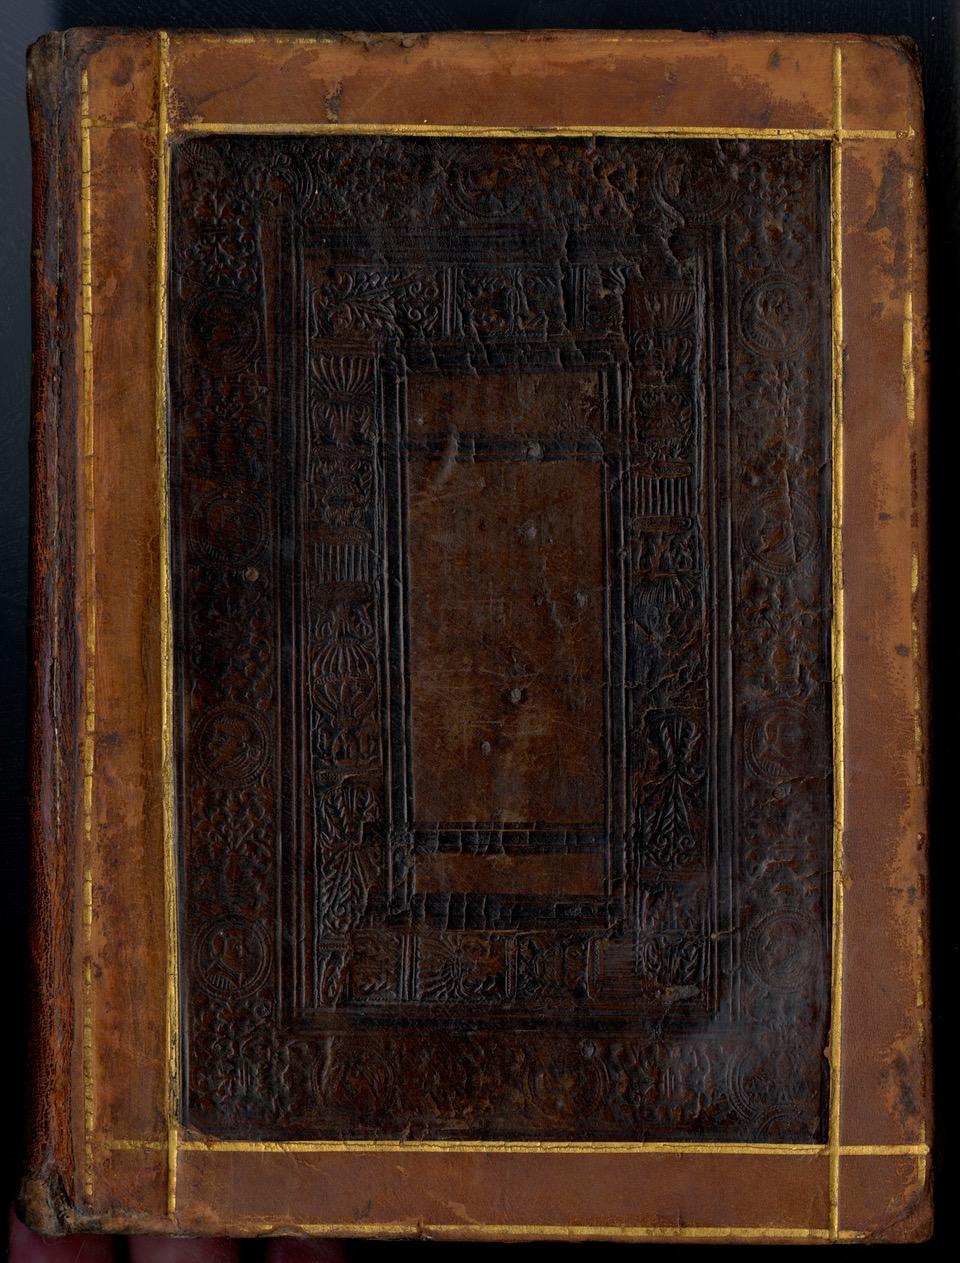 
Petrarch (Francesco Petrarca). Thomas Twyne, translator.
Phisicke against Fortune, as well prosperous, as adverse, contained in two Bookes [History of Gain and Fortune]

London: Richard Watkyns, 1579. 
FIRST EDITION in English
Small 4to; 7 1/2 x 5